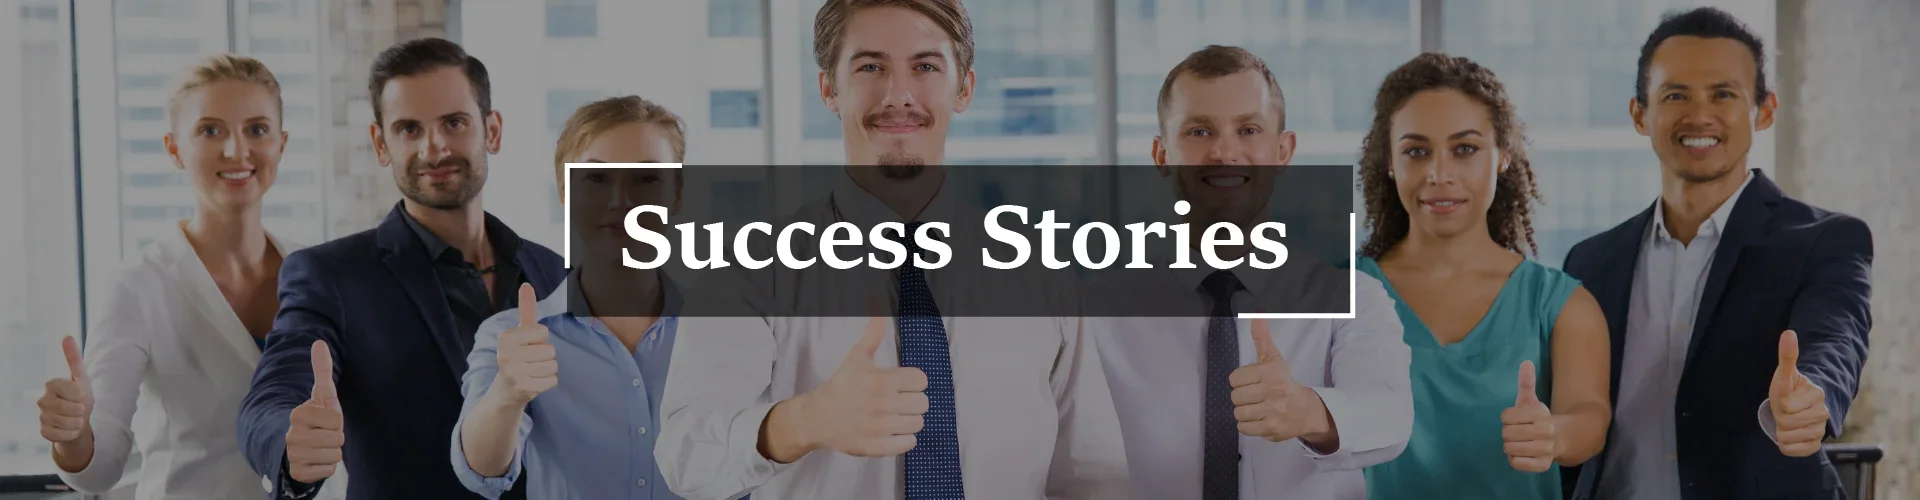 Success Story Banner